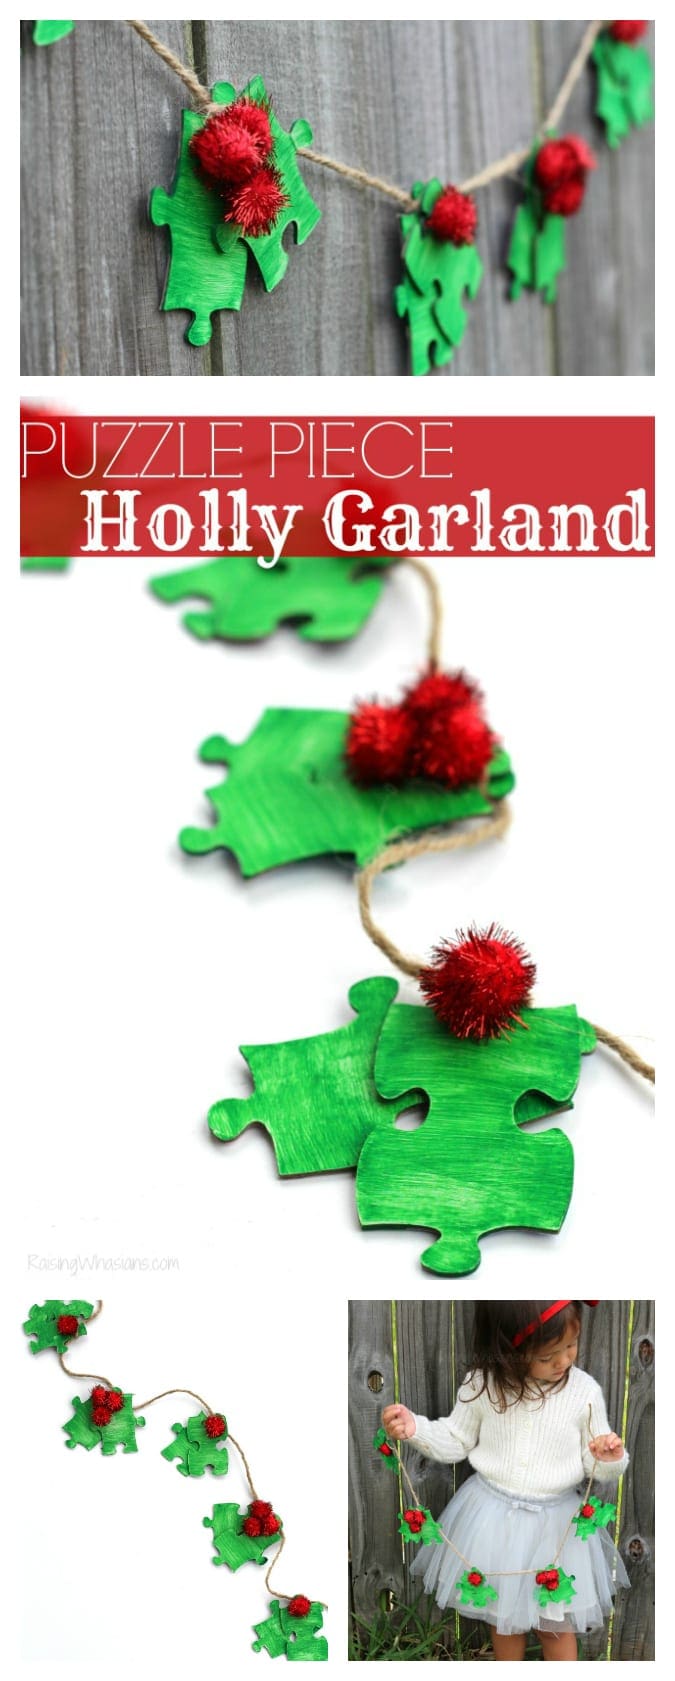 Upcycled puzzle piece Christmas craft Puzzle Piece Holly Garland Christmas Kids Craft | make this easy upcycled kids craft for the holidays using old puzzle pieces! #Christmas #Craft #KidsCraft